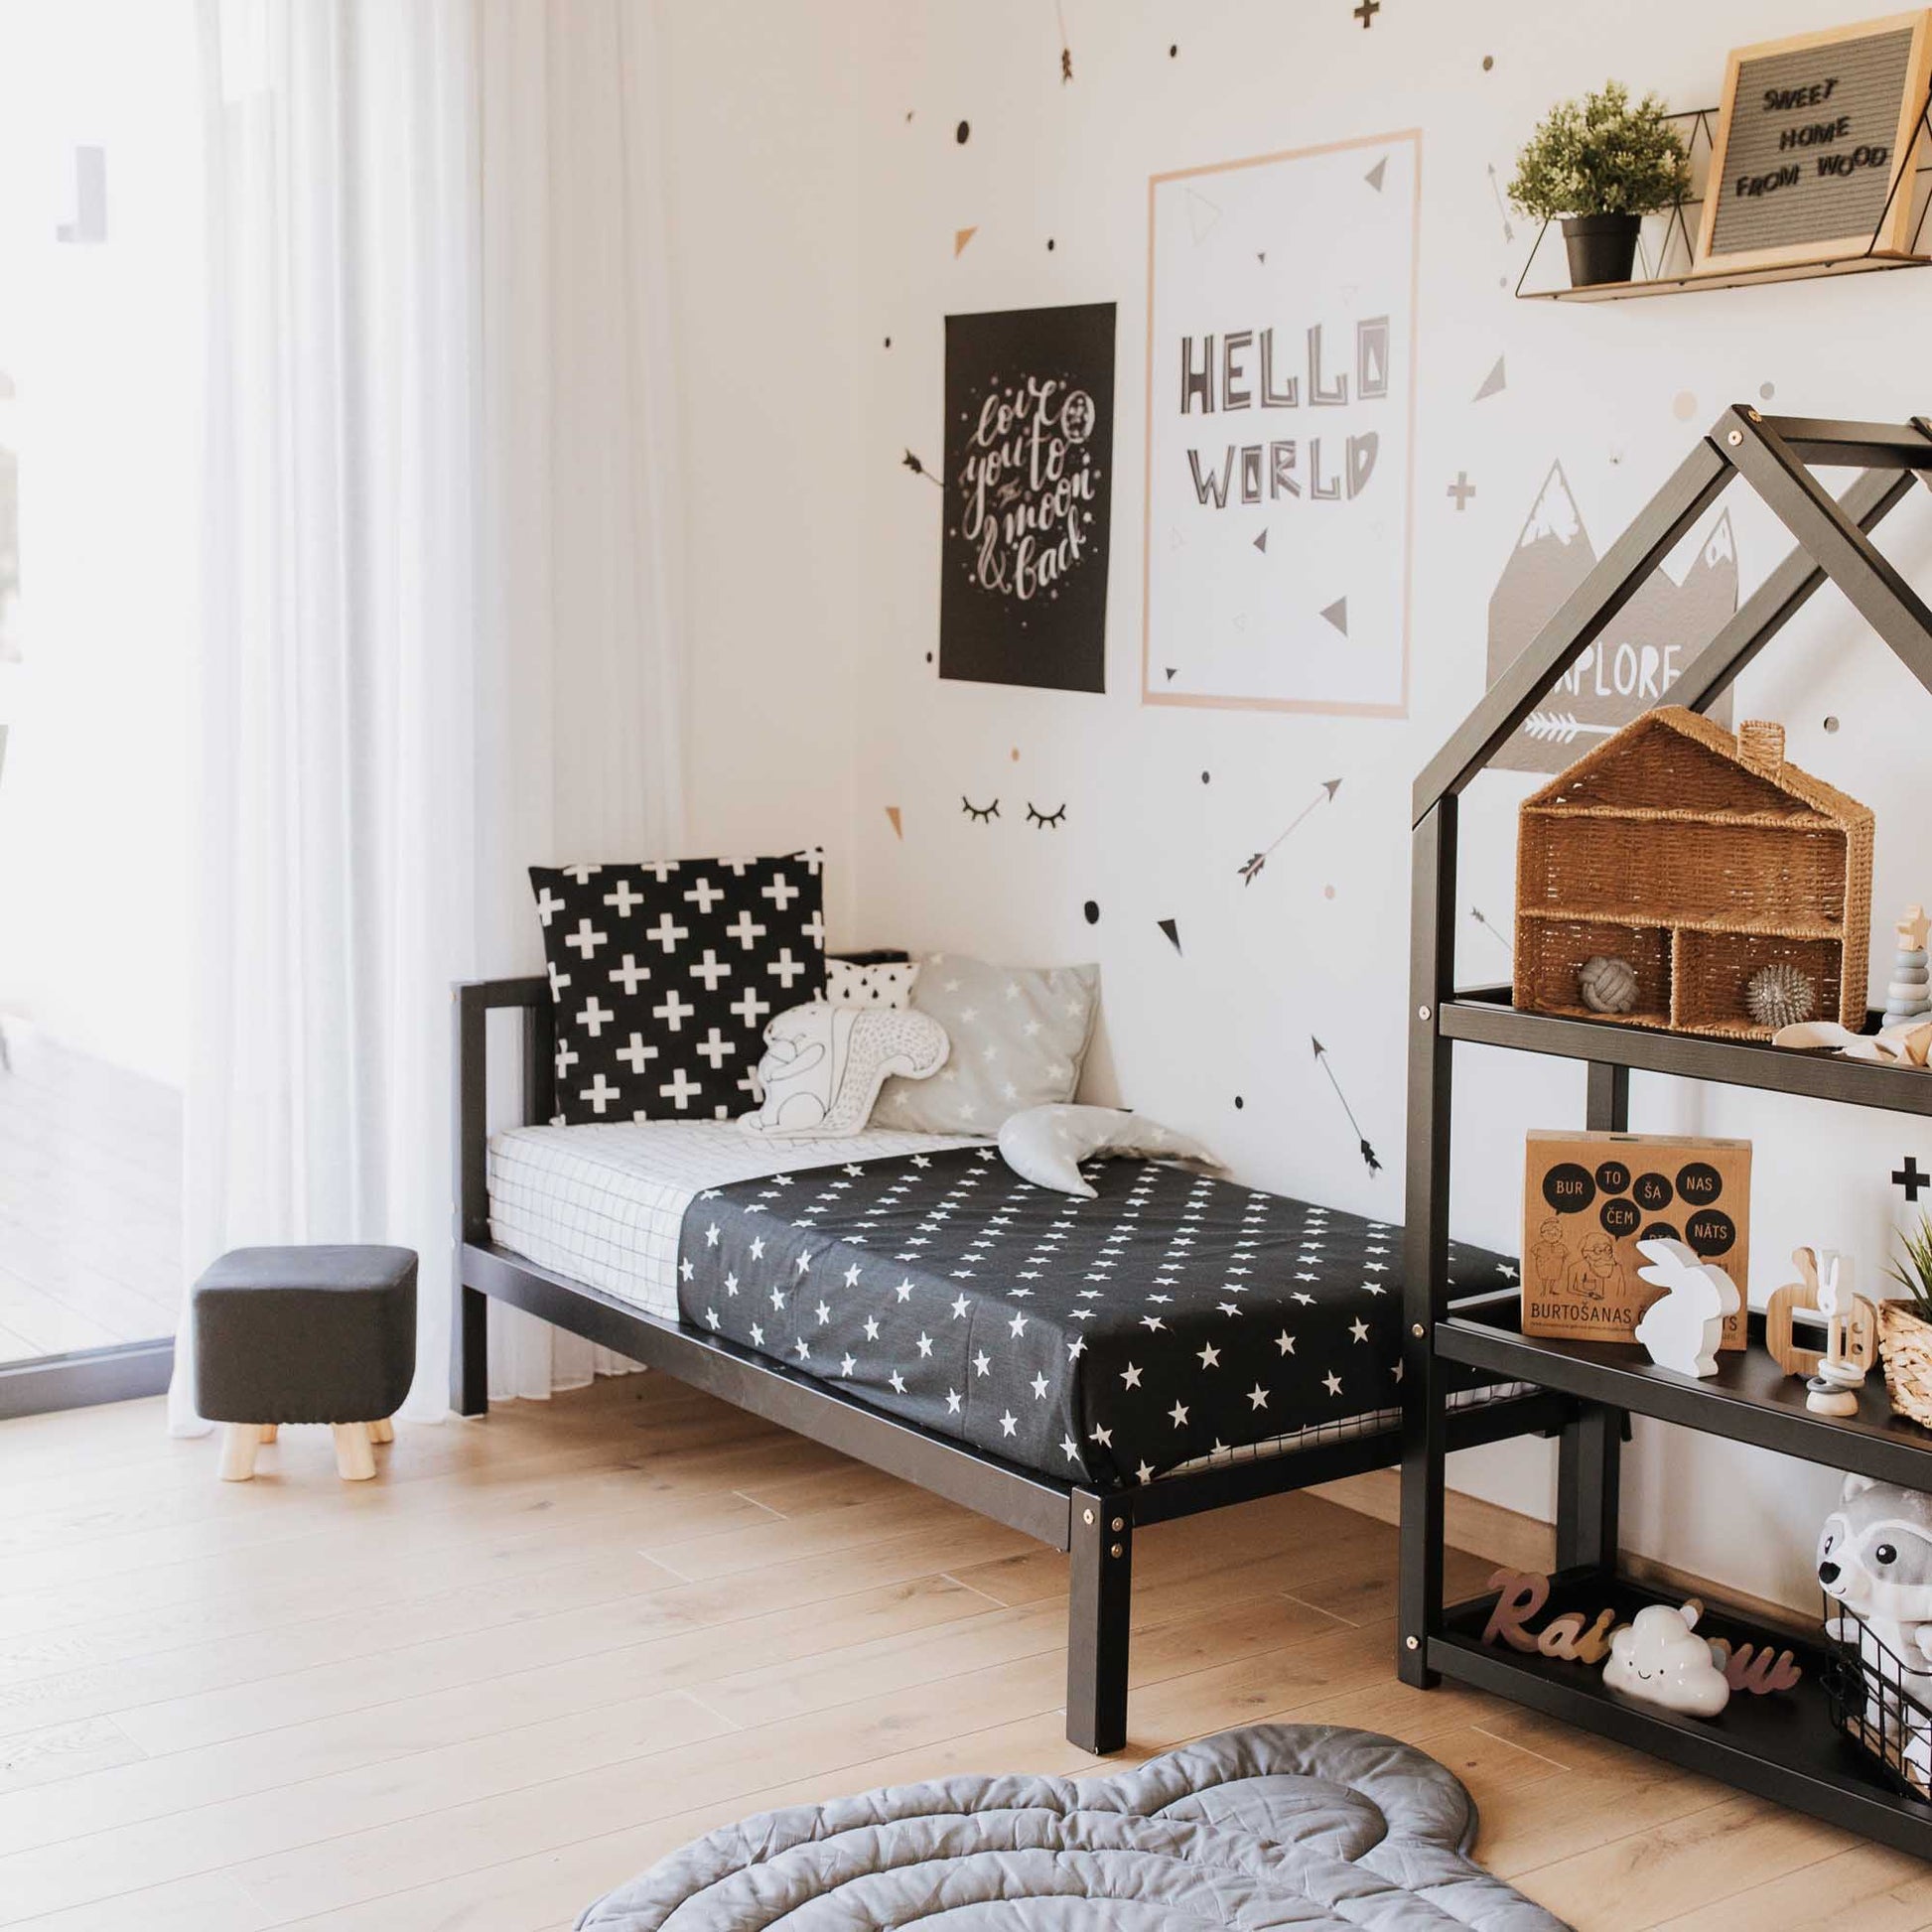 A black and white children's room with polka dots on the walls, perfect for a Sweet Home From Wood 2-in-1 toddler bed on legs with a vertical rail headboard.